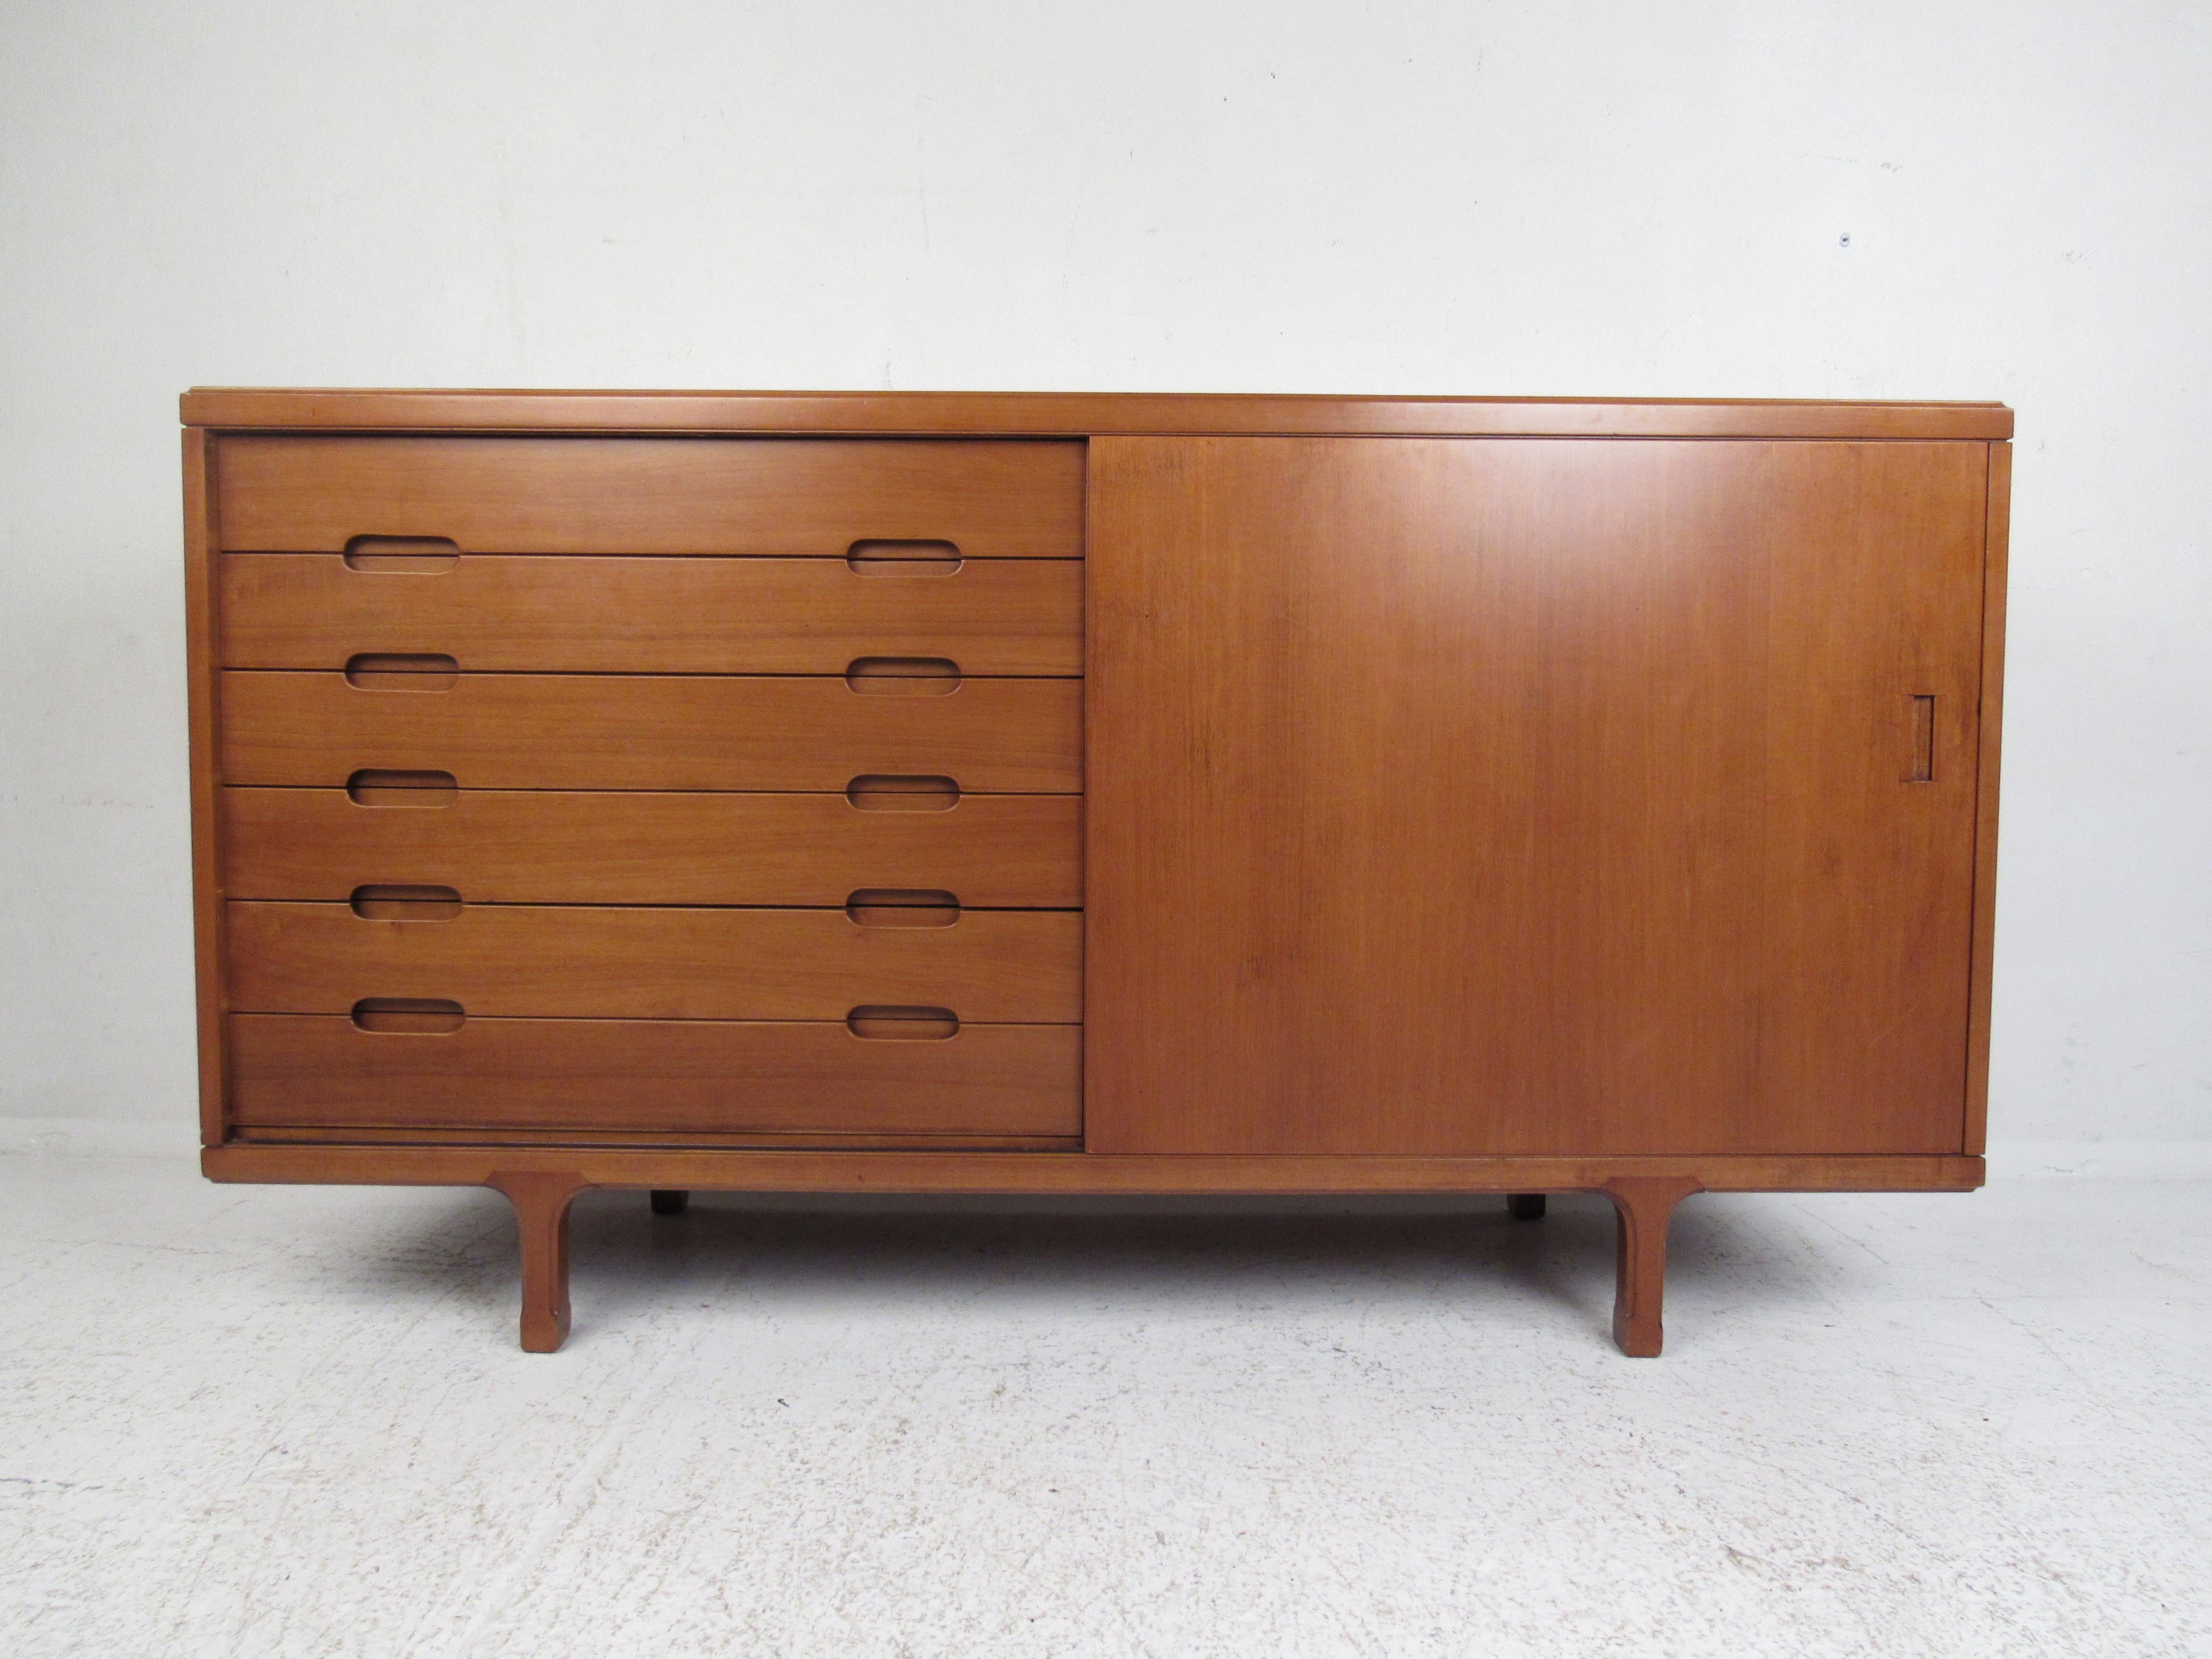 This beautiful vintage modern sideboard boasts sculpted legs and oval recessed drawer pulls. A compact design with six hefty drawers and a large open compartment hidden by a sliding door. This stylish case piece has a charming vintage finish and